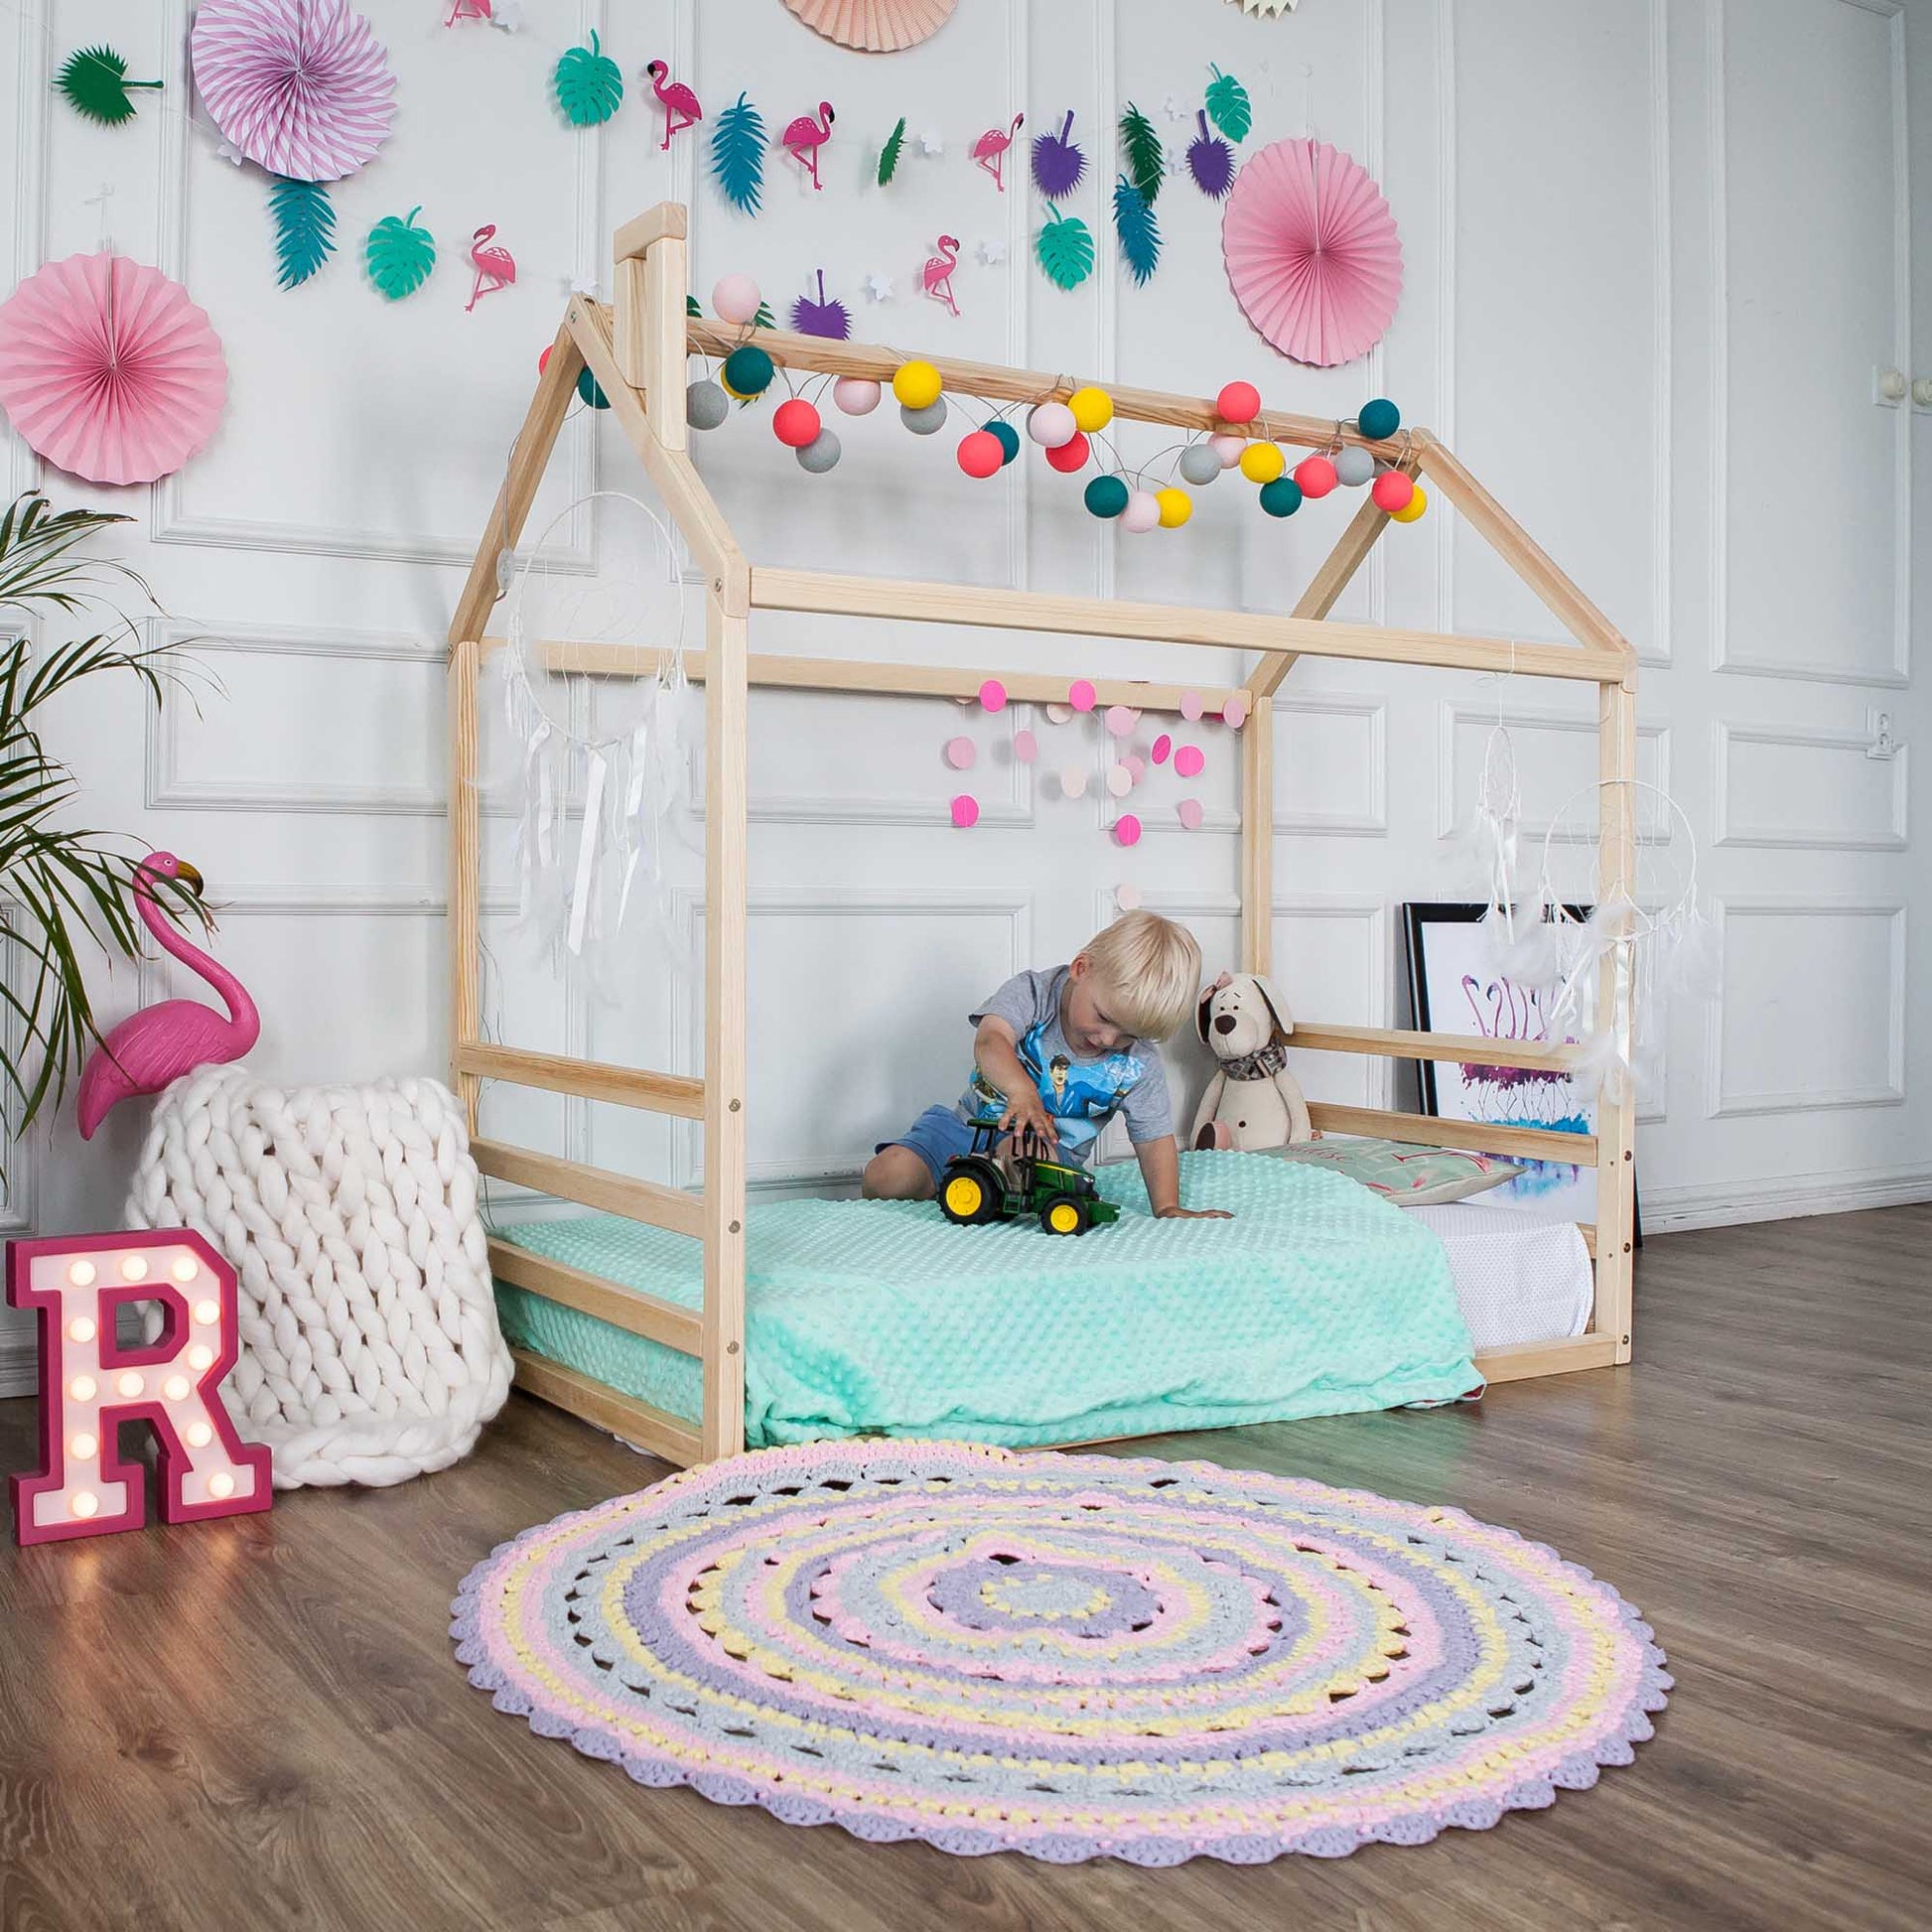 A child's room with a floor house-frame bed with a horizontal headboard and footboard.